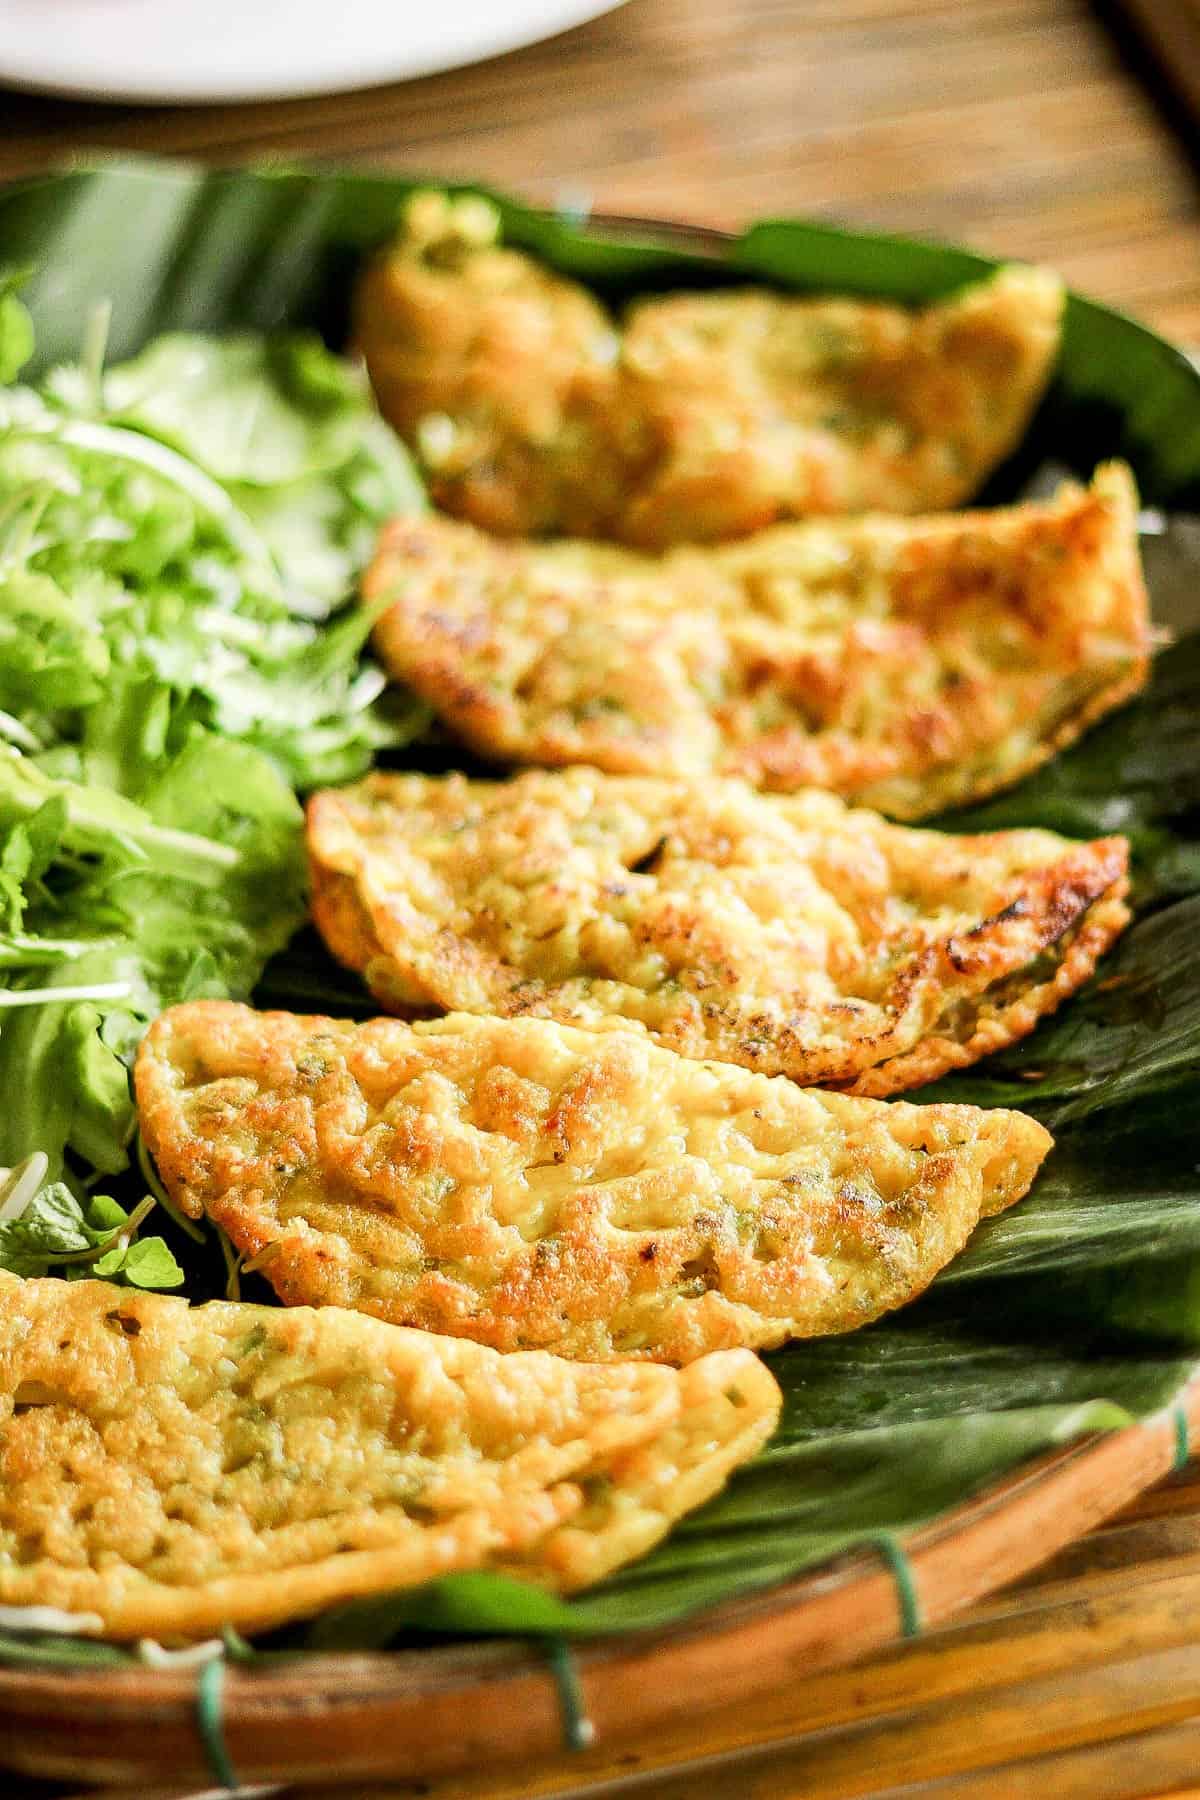 Crispy Vietnamese crepes laid out on banana leaves.